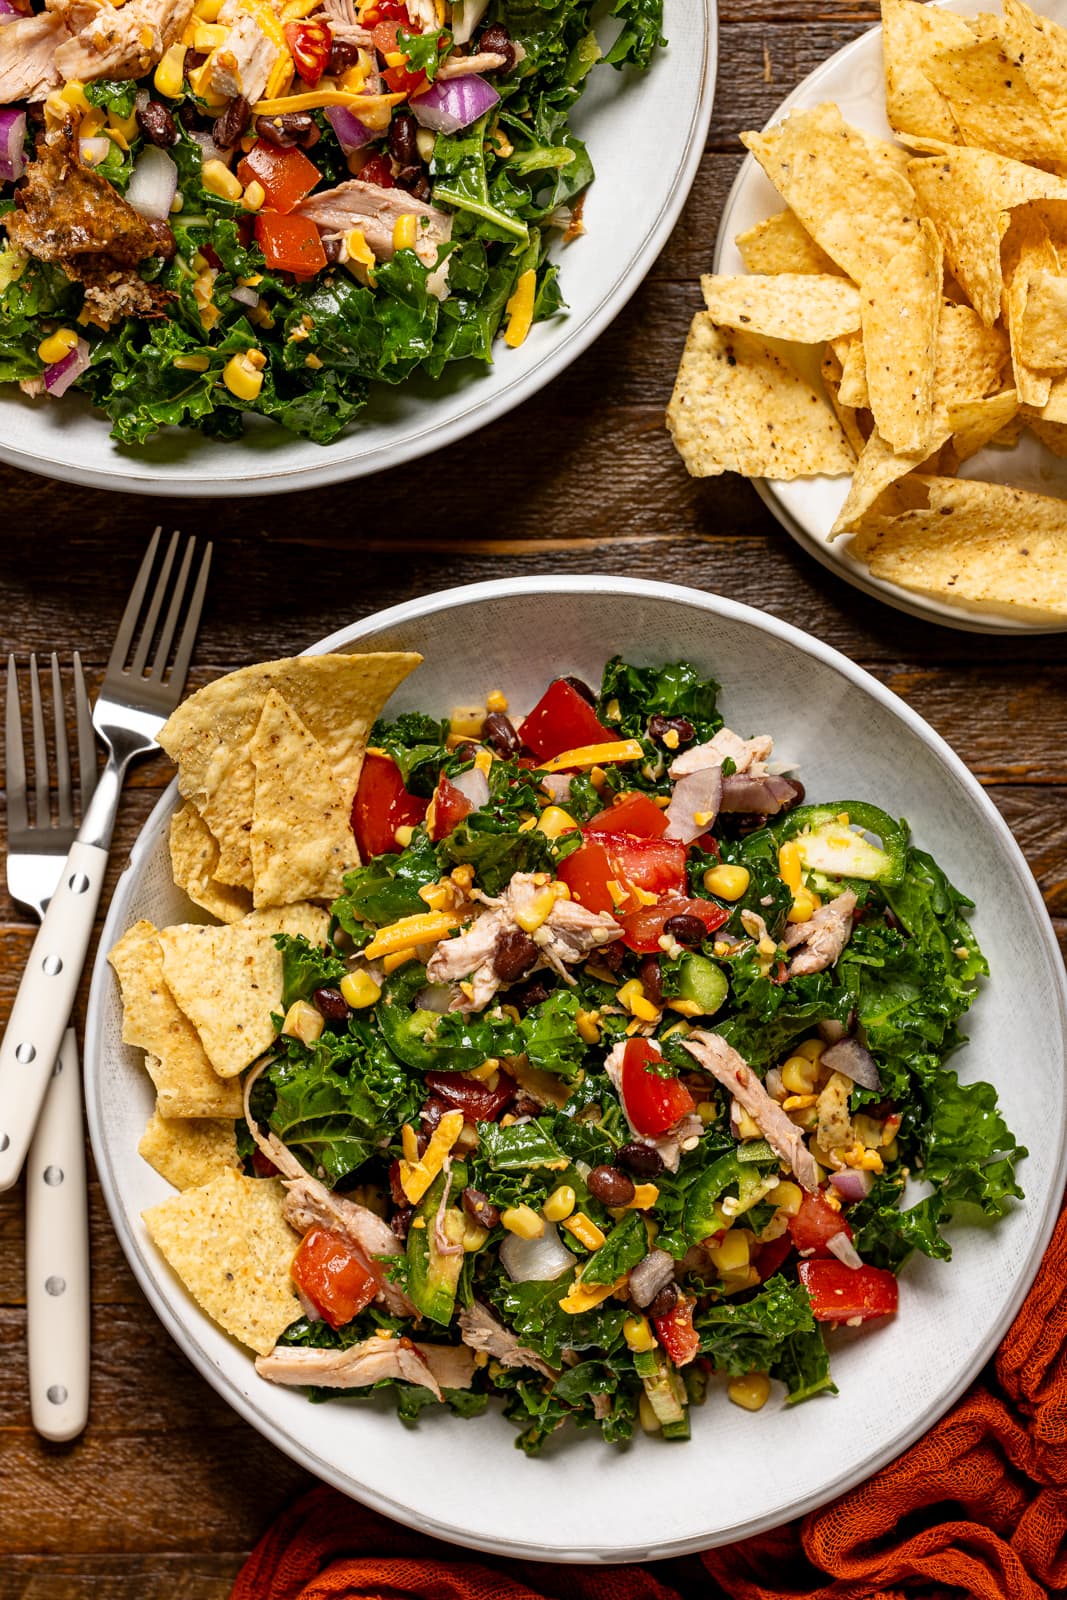 Two bowls of salad with forks and a side of tortilla chips.